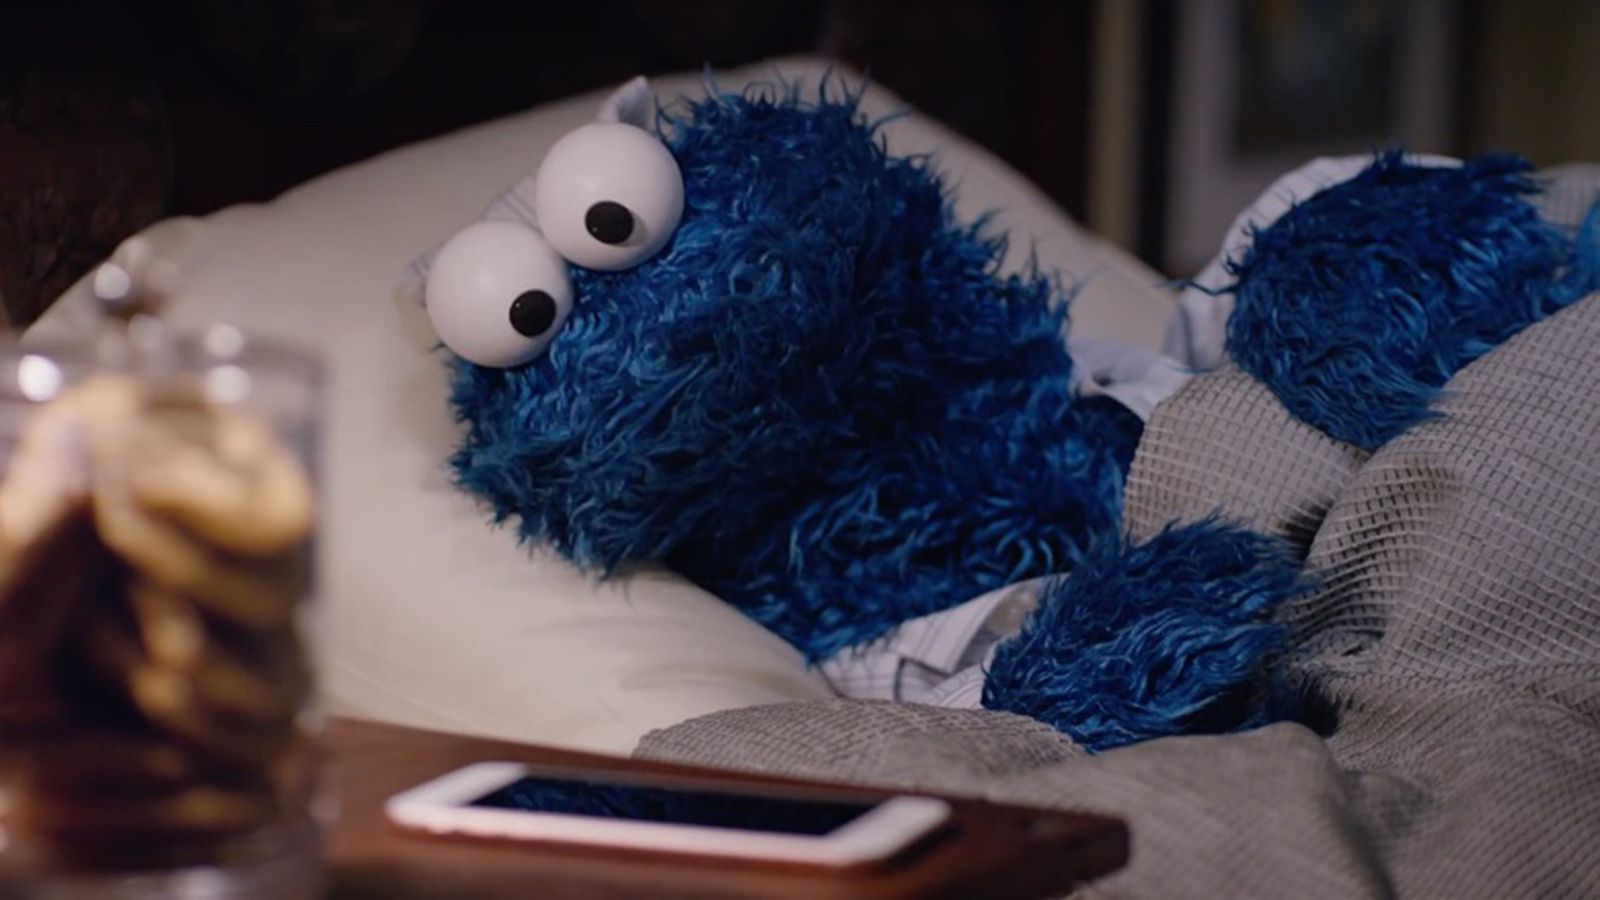 Don't Touch the Cookie Monster's Cookies!!!! on Make a GIF